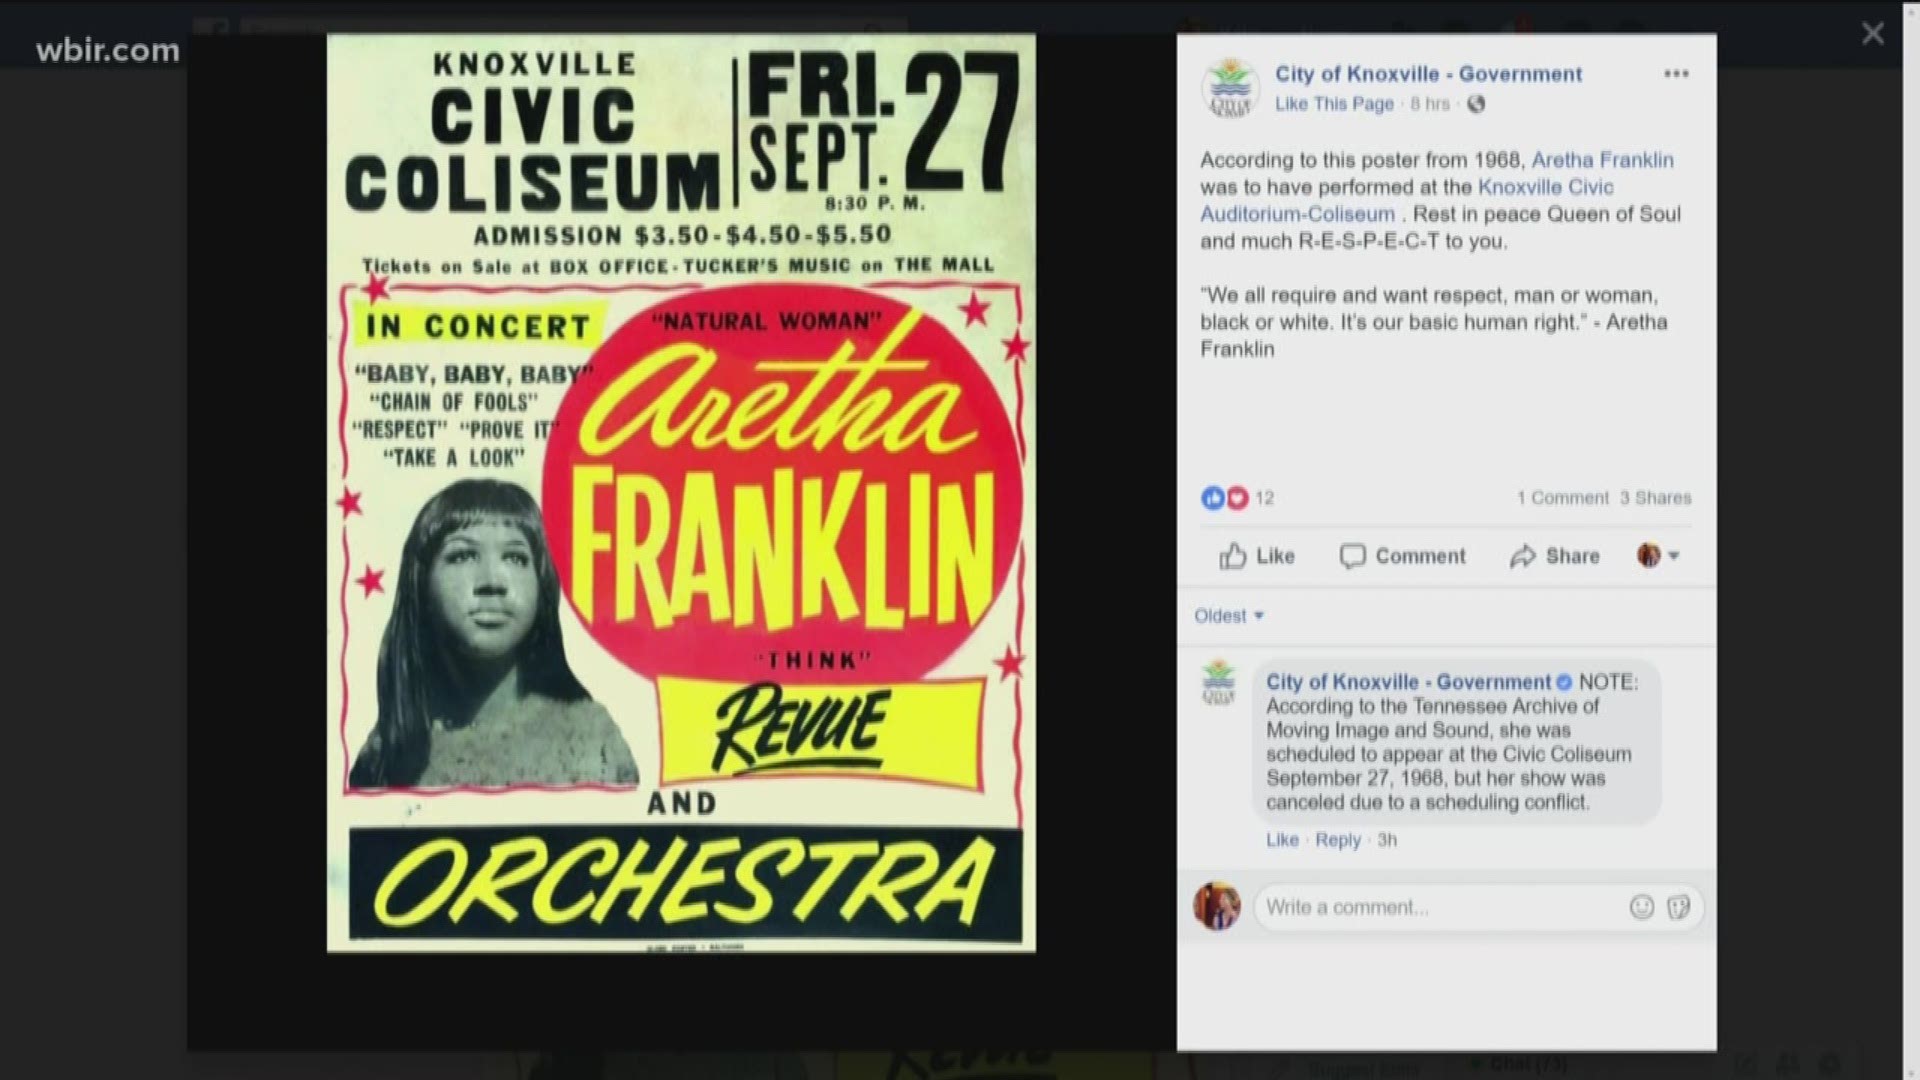 The City of Knoxville shared an image of the would-have-been concert's poster to remember Franklin, who died Thursday at age 76.